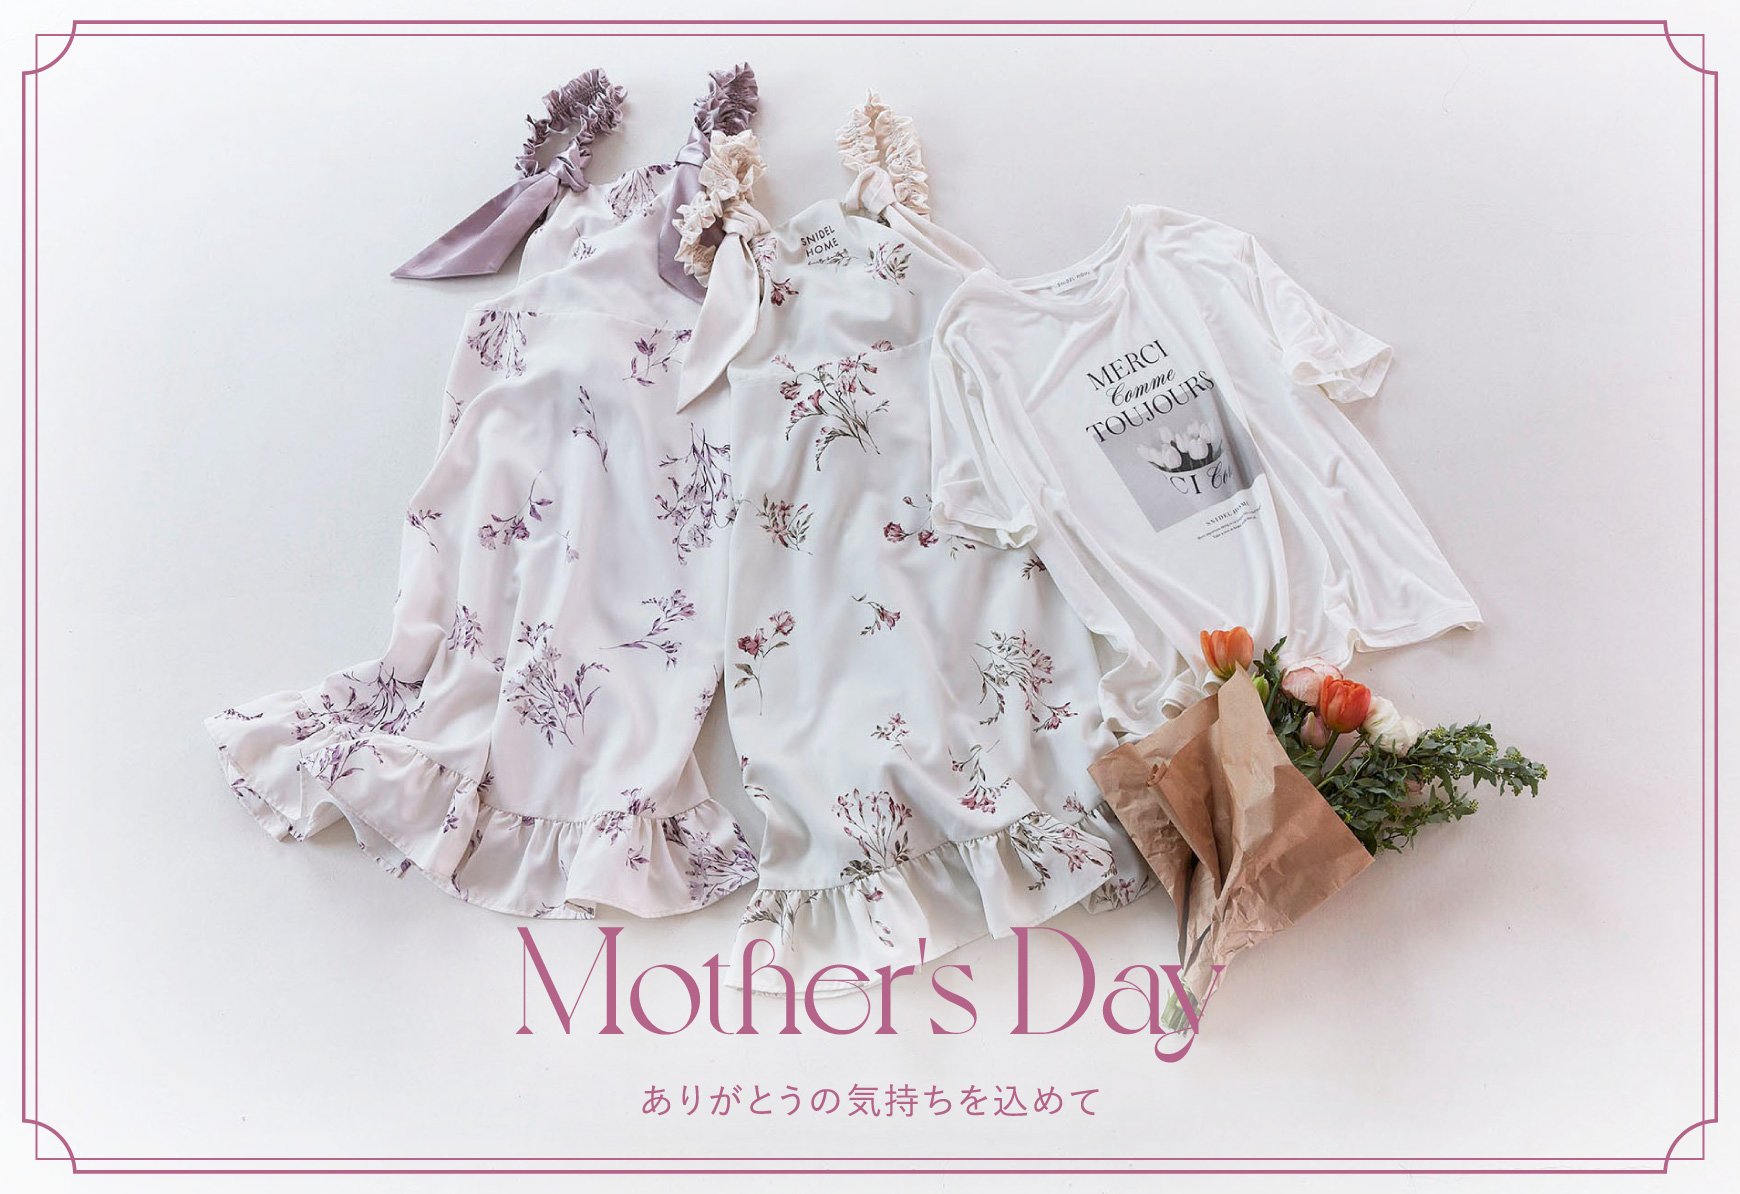 Mother's Day ありがとうの気持ちを込めて